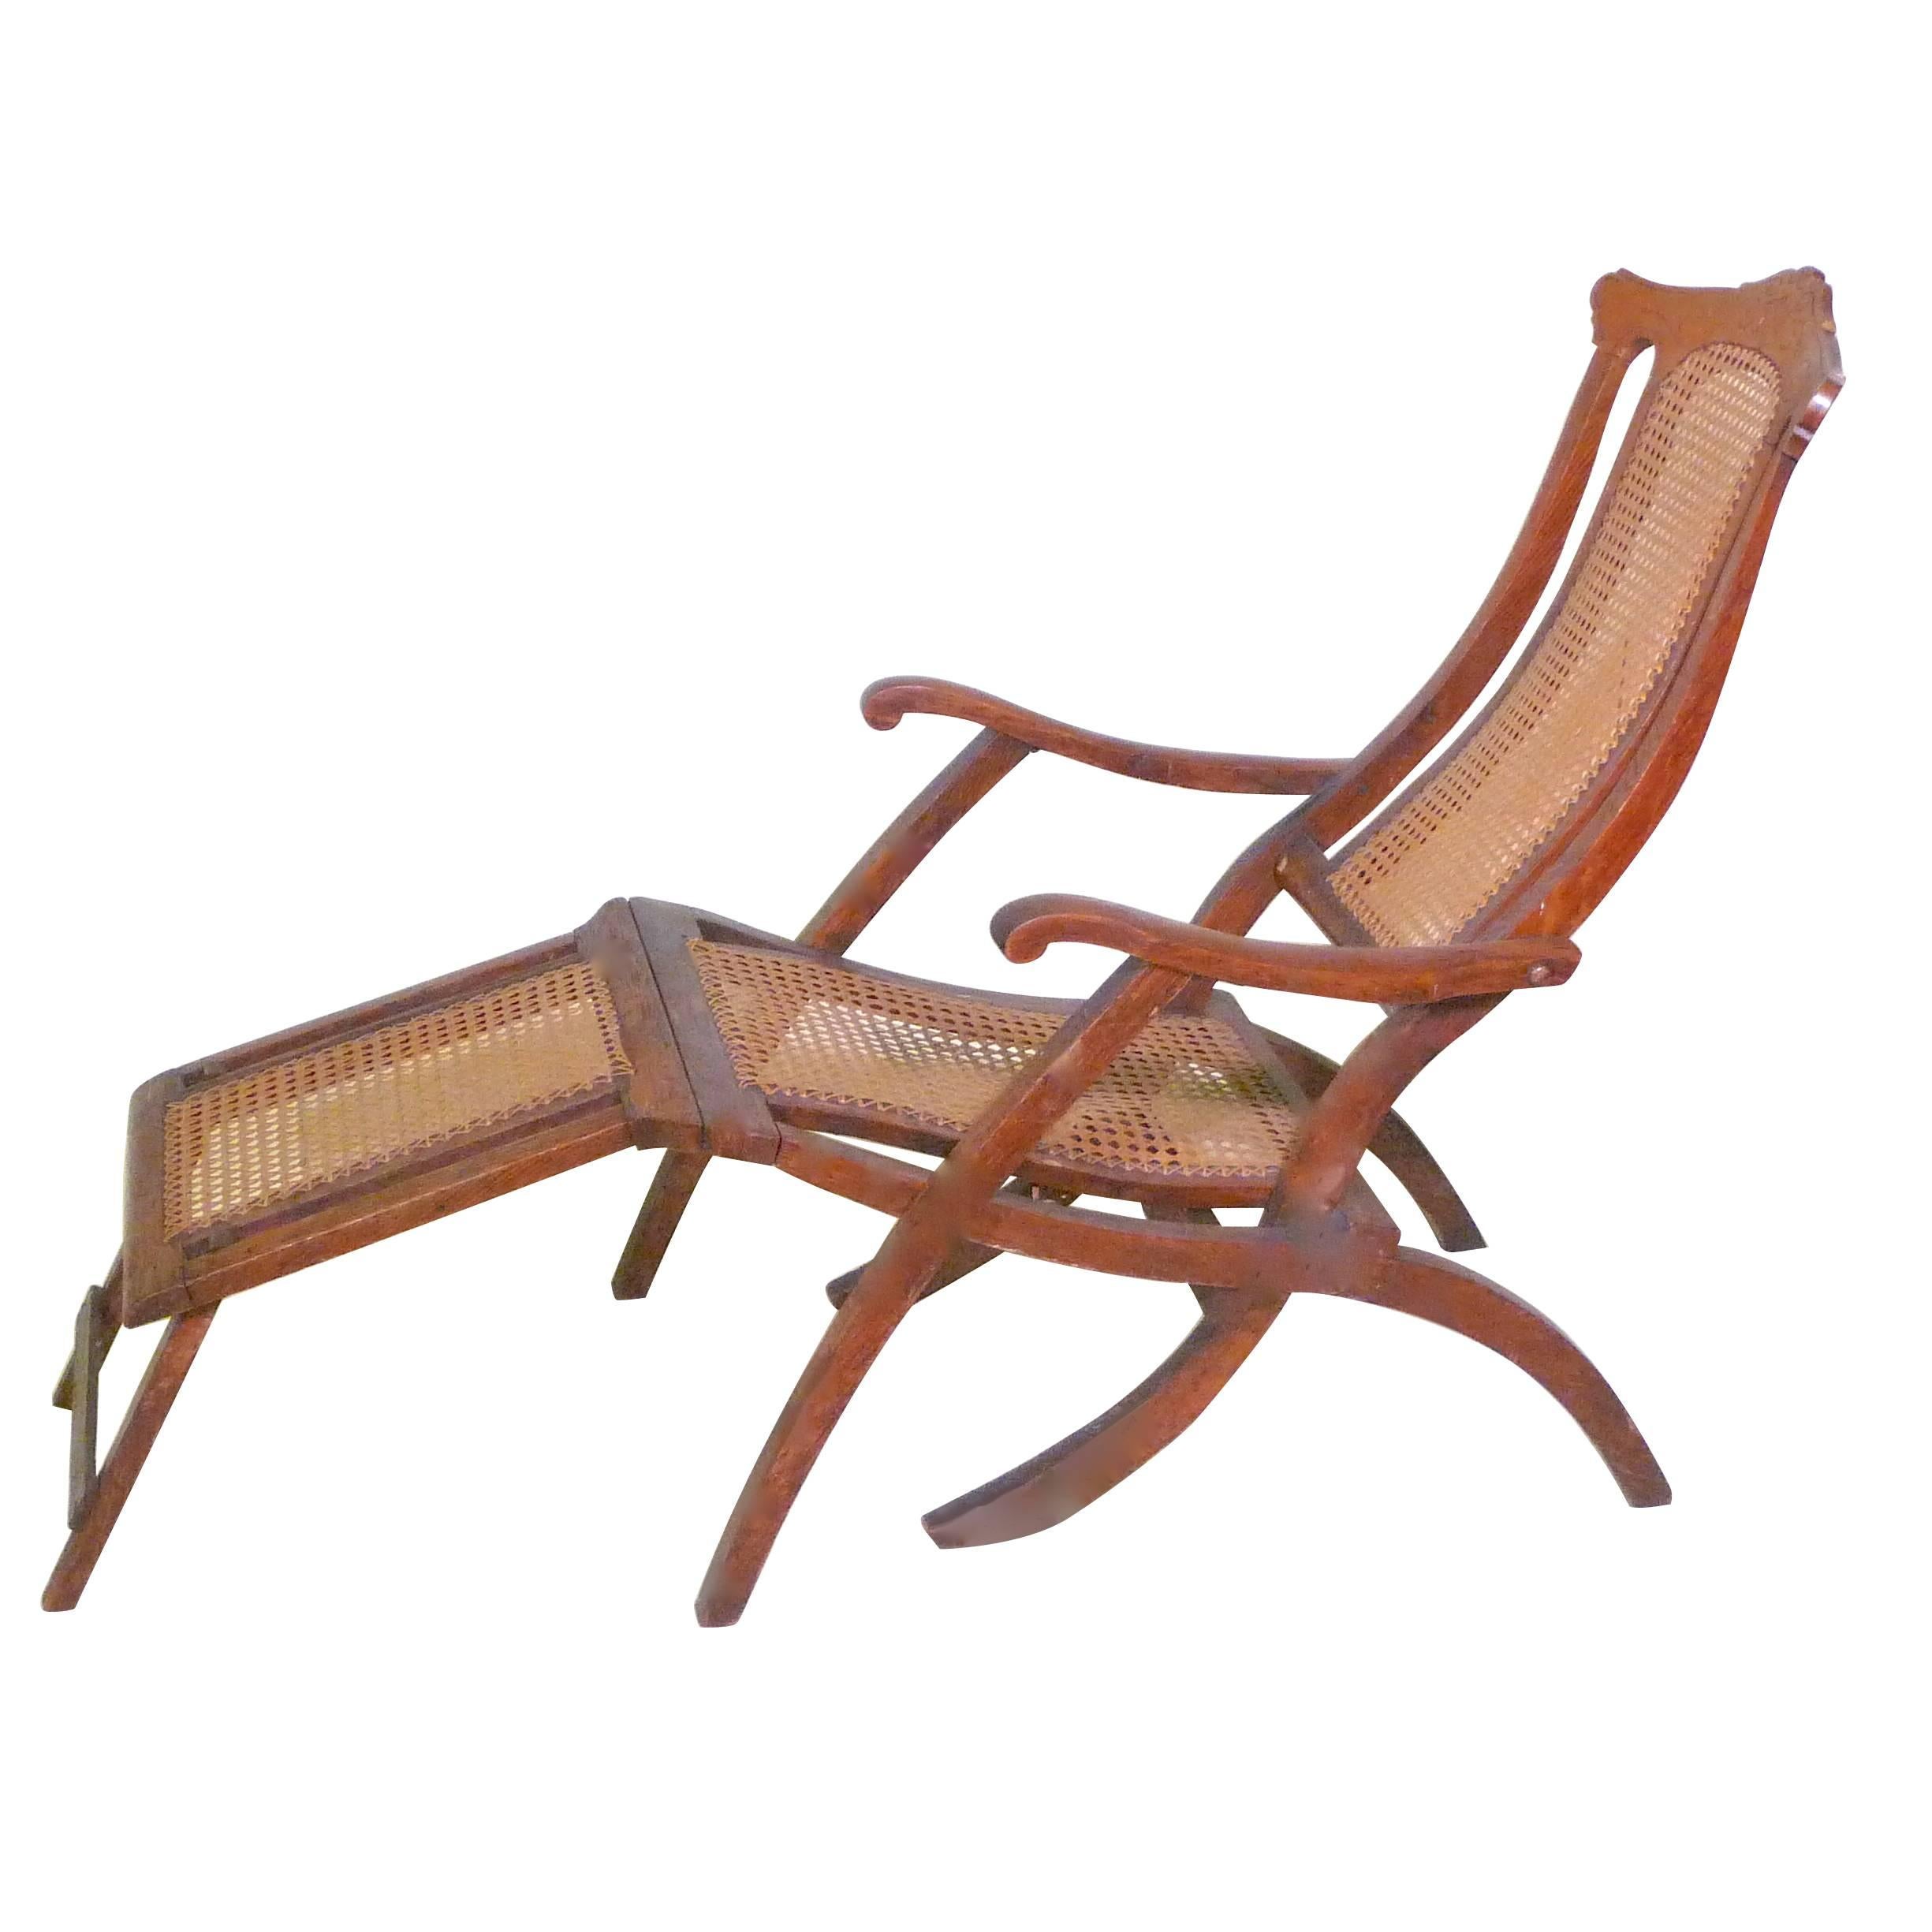 Antique Folding Luxury Wood Steamer Deck Chair, circa 1890, England For Sale